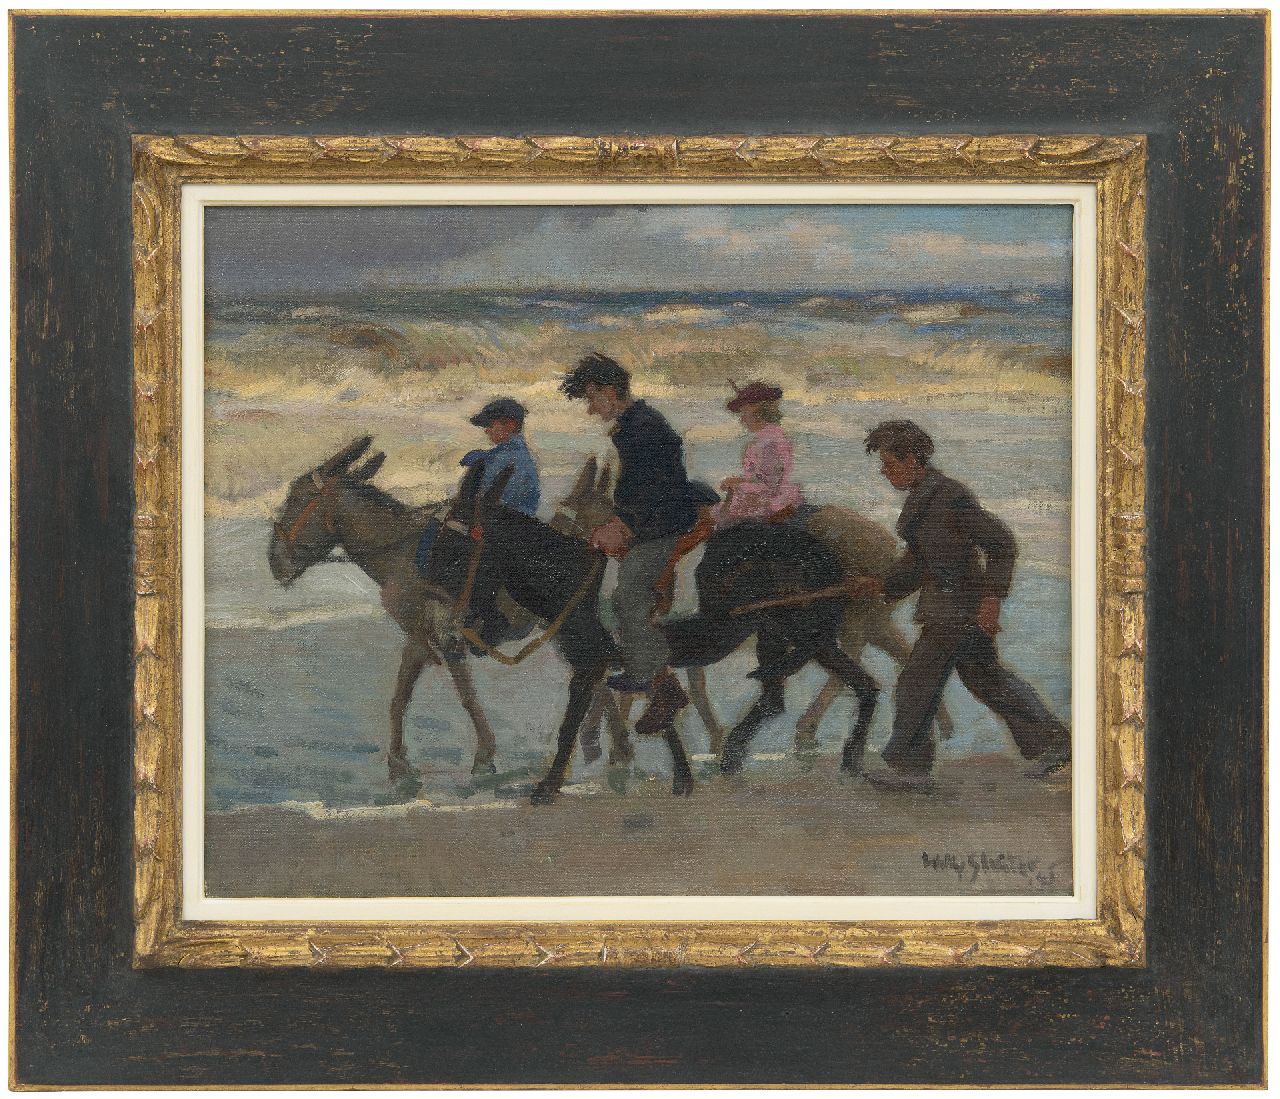 Sluiter J.W.  | Jan Willem 'Willy' Sluiter, Donkey ride on the beach, oil on canvas laid down on panel 40.1 x 50.3 cm, signed l.r. and dated '48